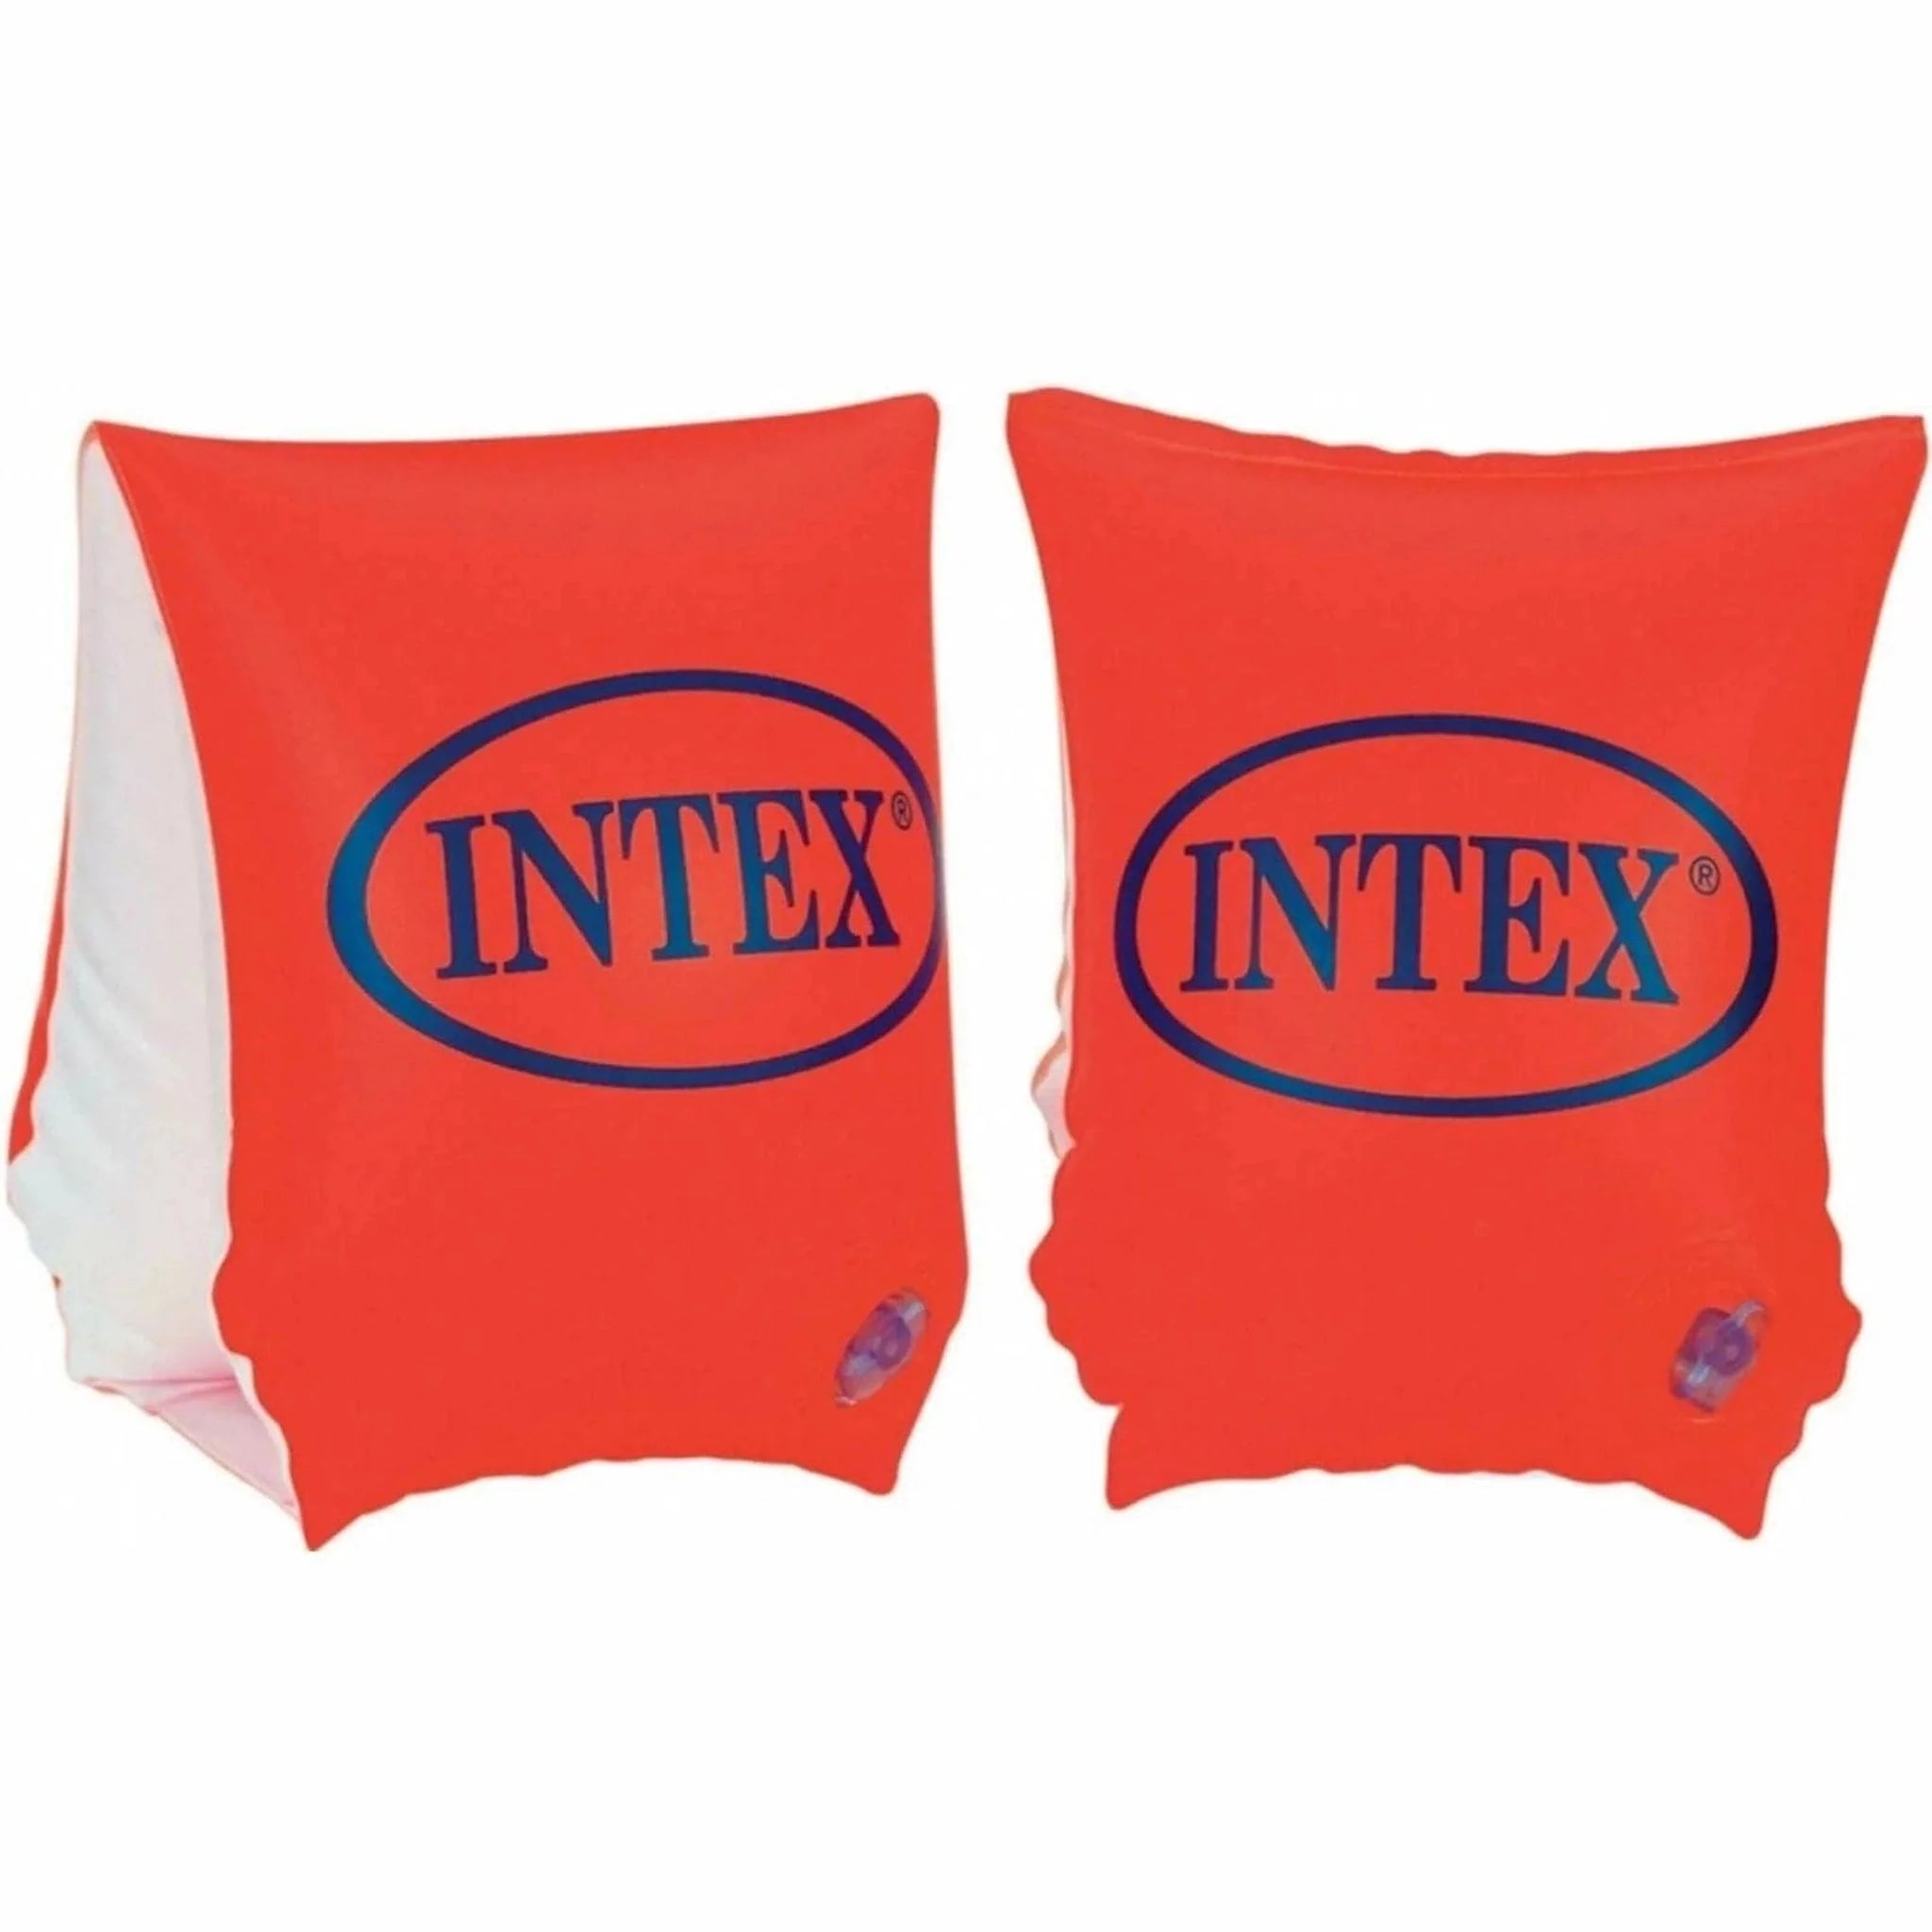 Children's Quality Intex Swimming Armbands - Kids Party Craft